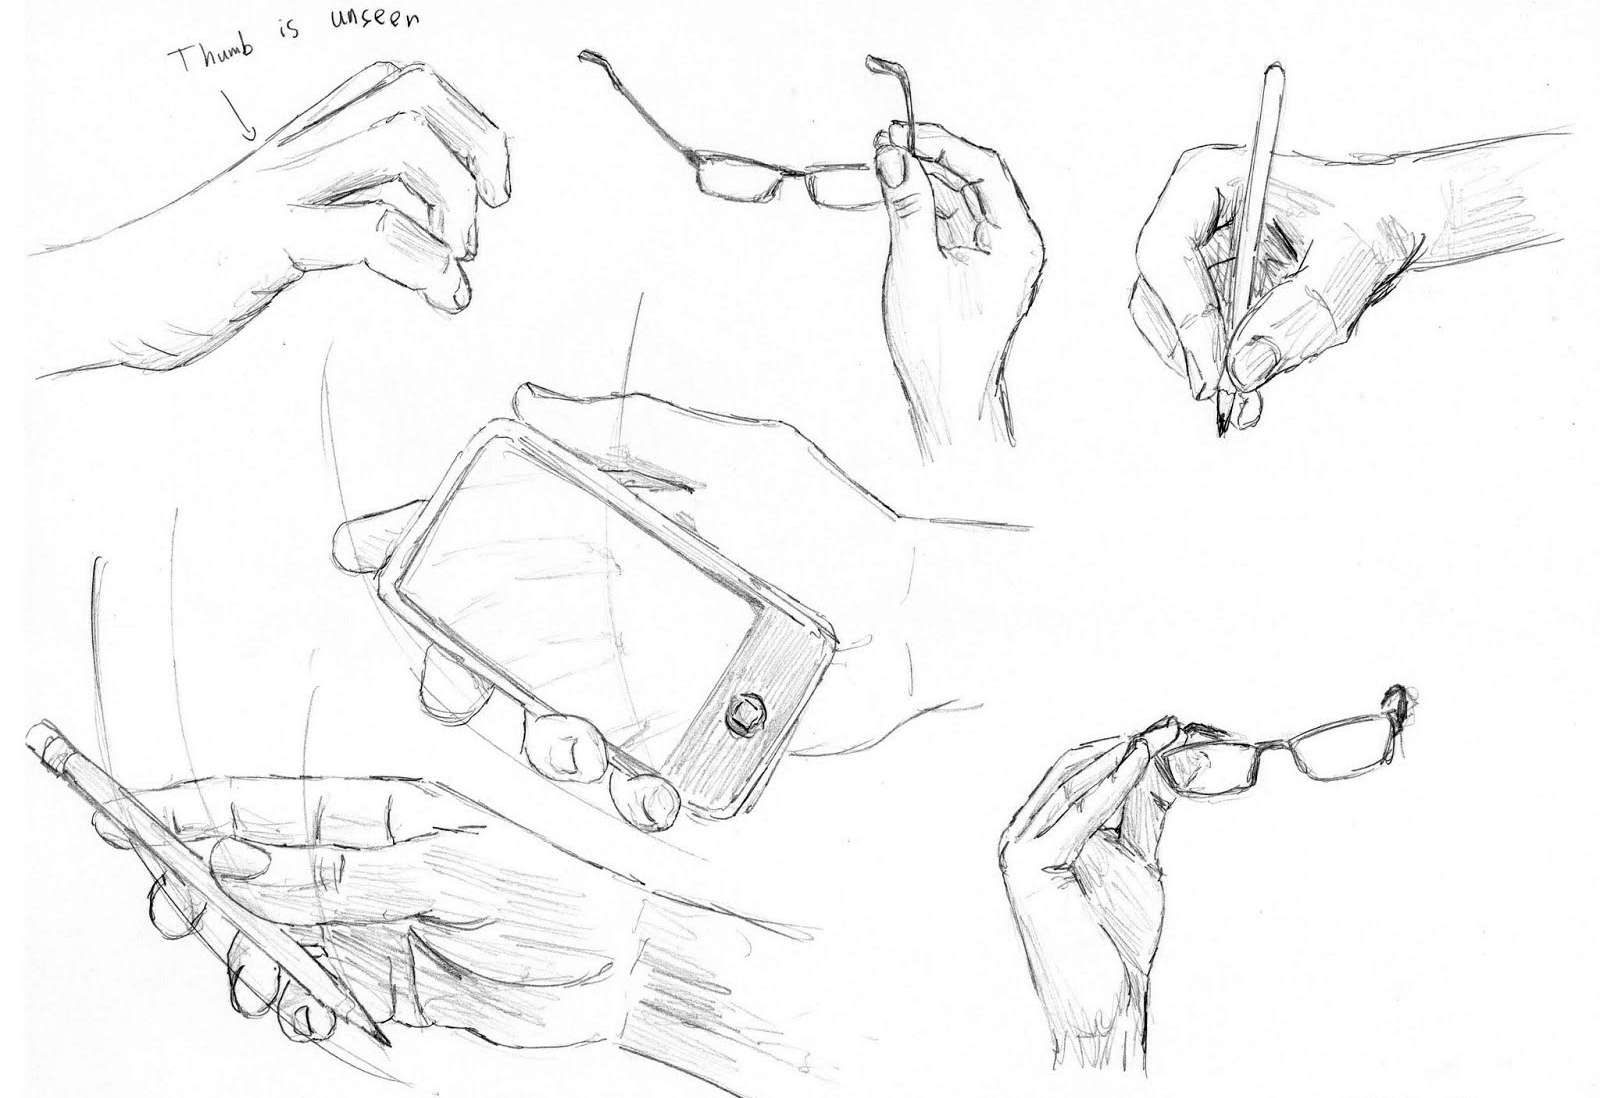 How To Draw Hands Poses Quick Reference Liron Yanconsky The first step is to get a clear idea of the hand you're gonna draw. to draw hands poses quick reference